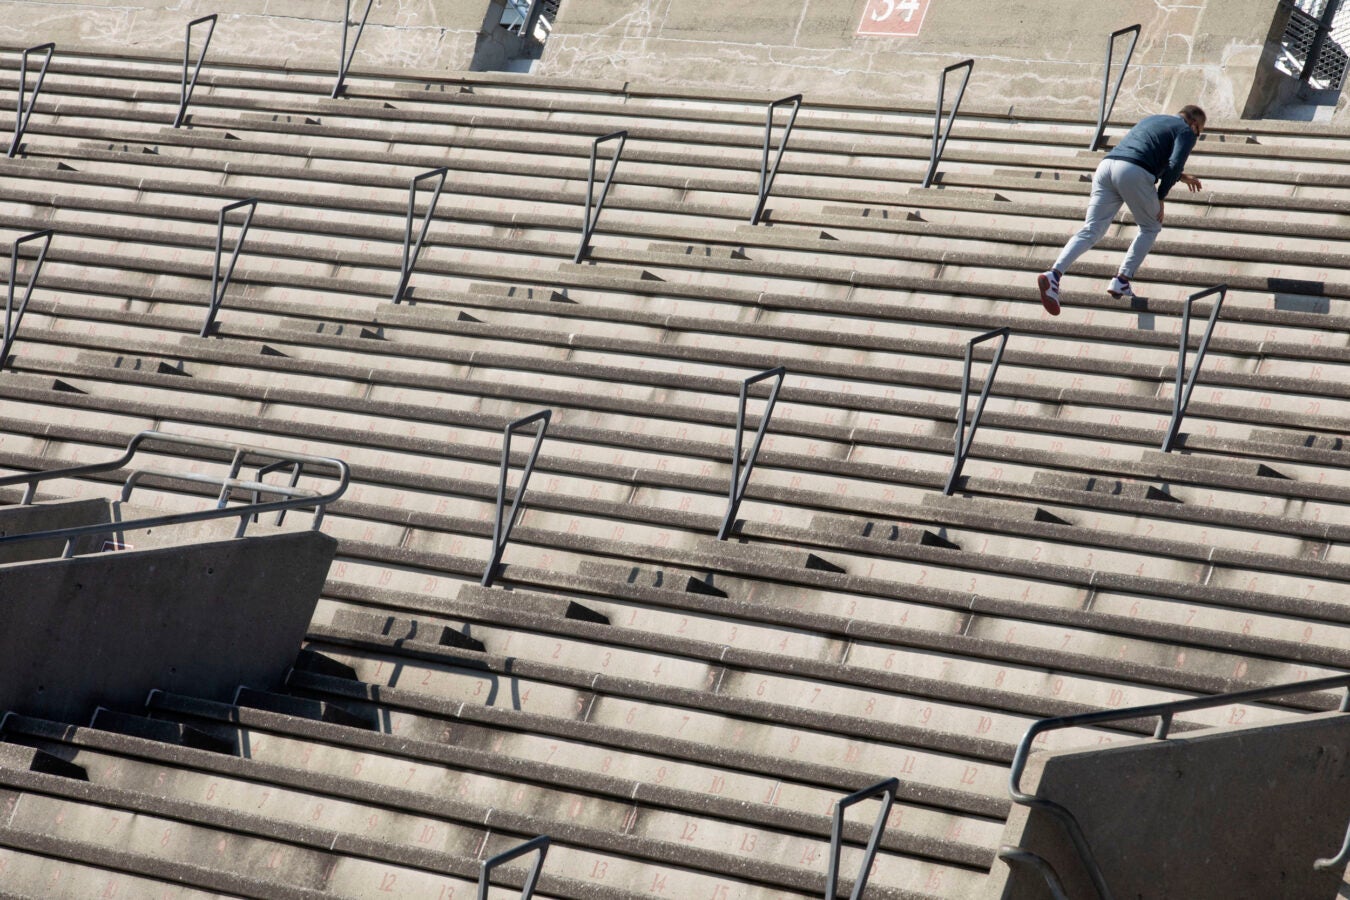 A dogged runner ascends the steep grid of Harvard Stadium stairs.